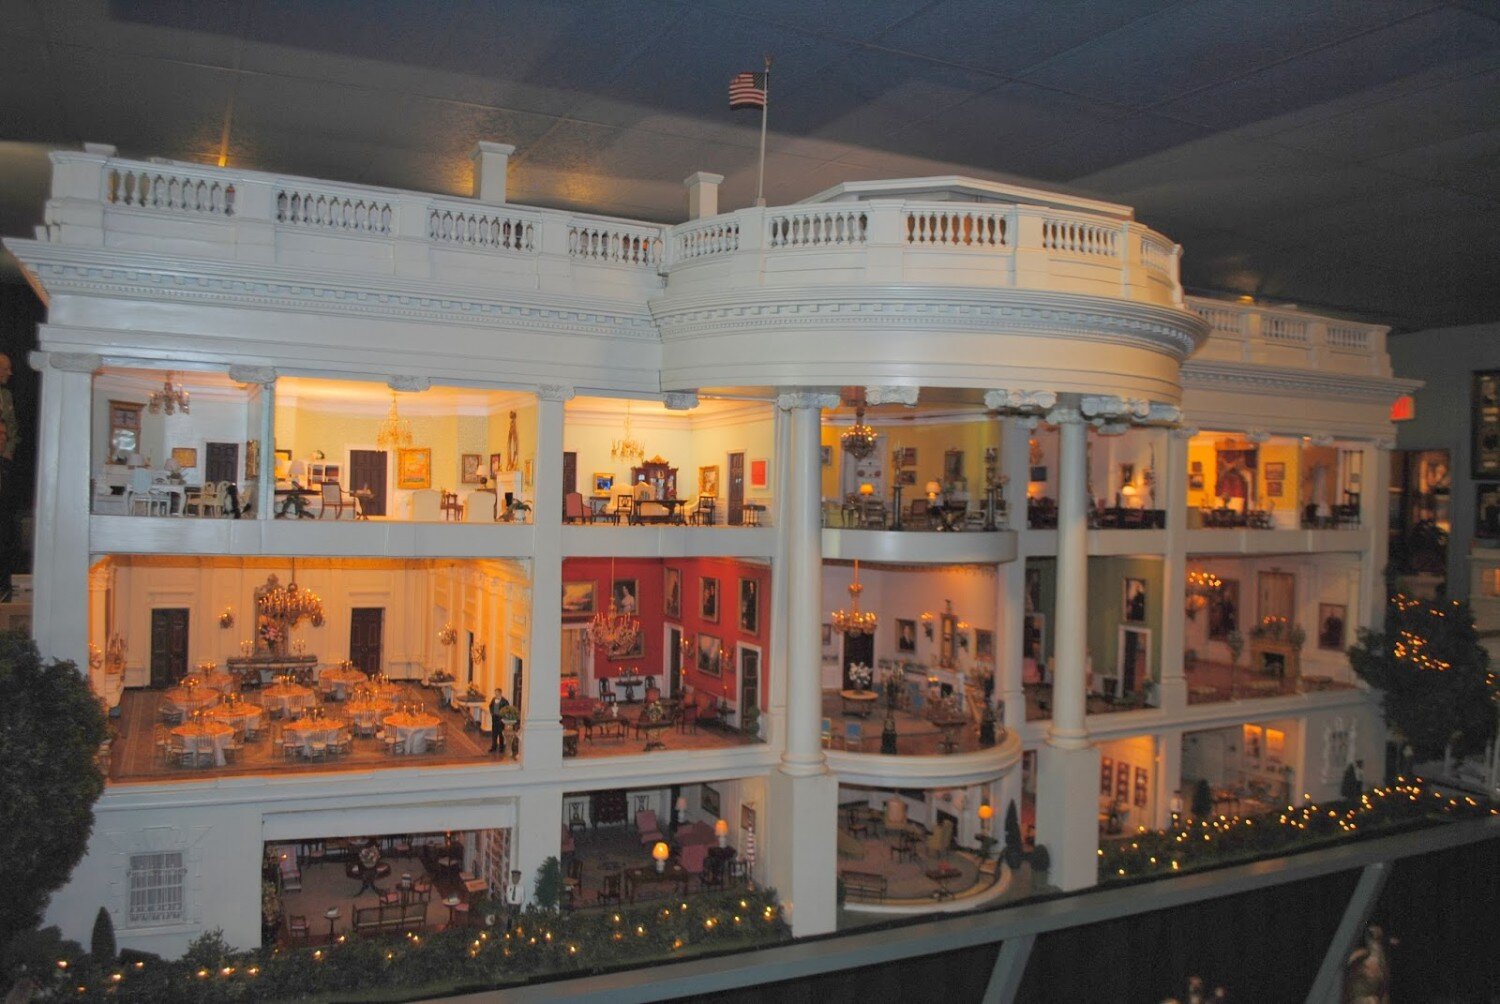 White House Replica at the President's Hall of Fame - Orlando, Florida (Clermont)